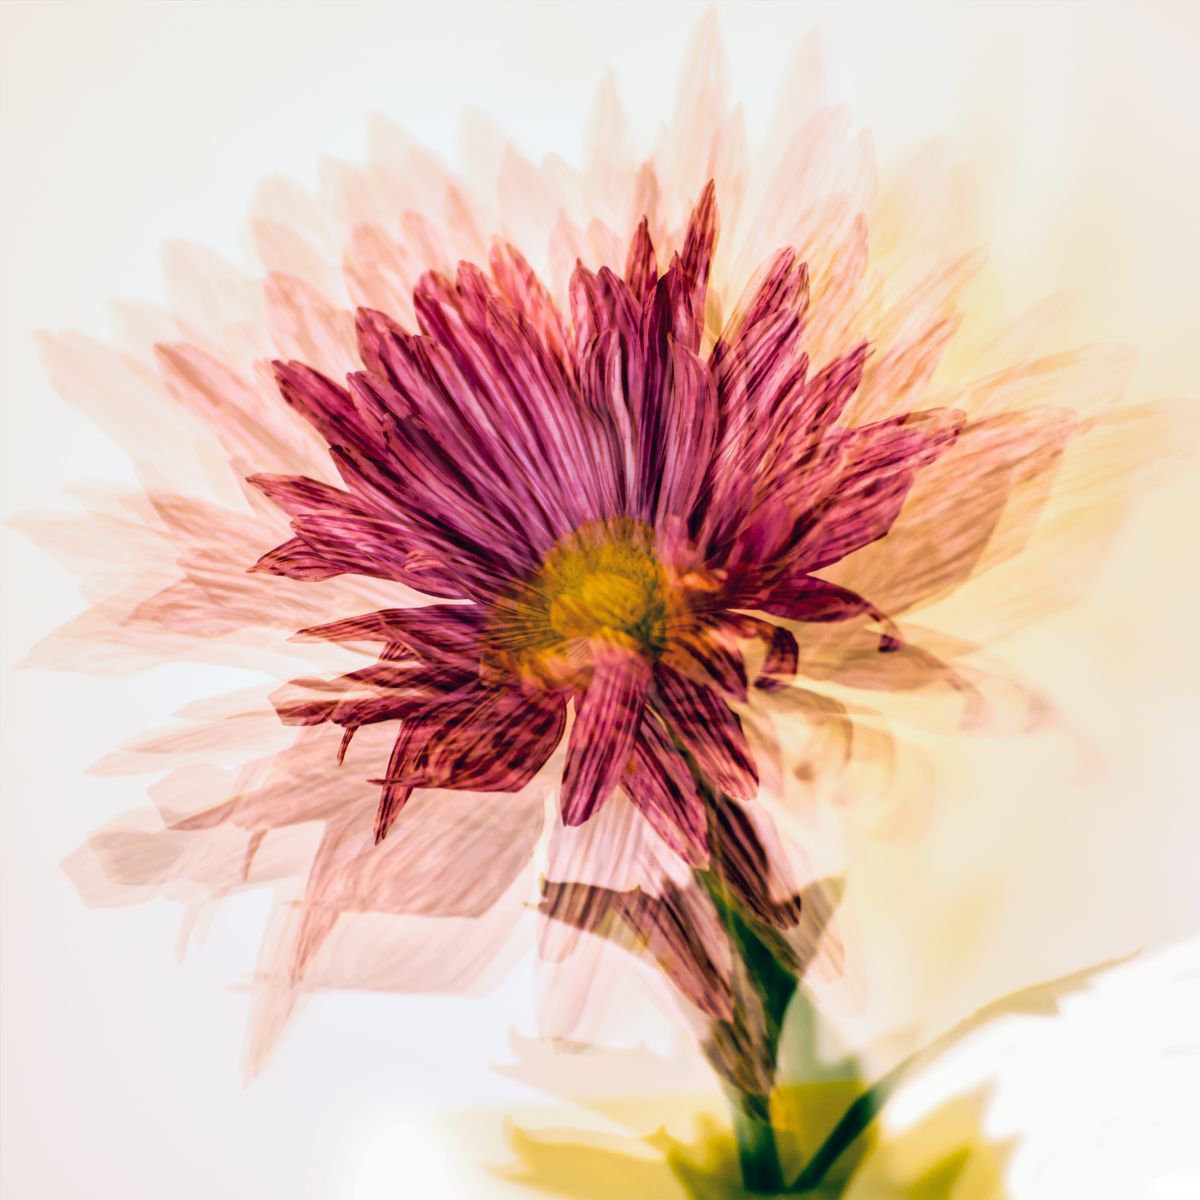 Psychedelic Flowers #7 Limited Edition 1/50 10x10 inch Photographic Print. by Graham Briggs